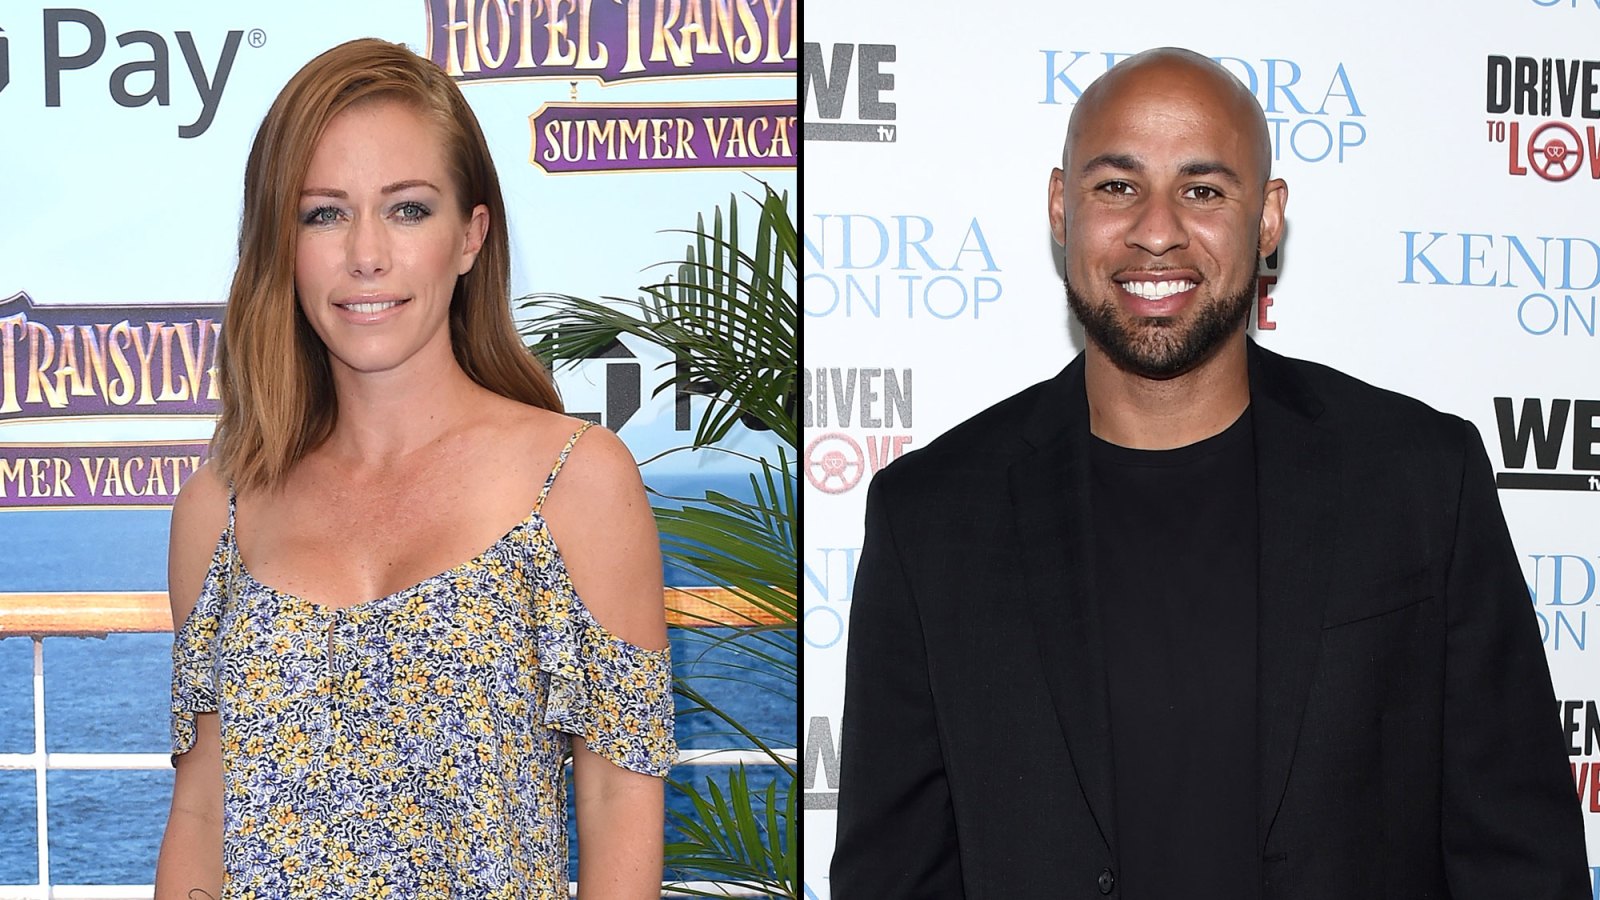 Kendra Wilkinson, Hank Baskett Finalize Divorce 10 Months After Filing to Legally Separate